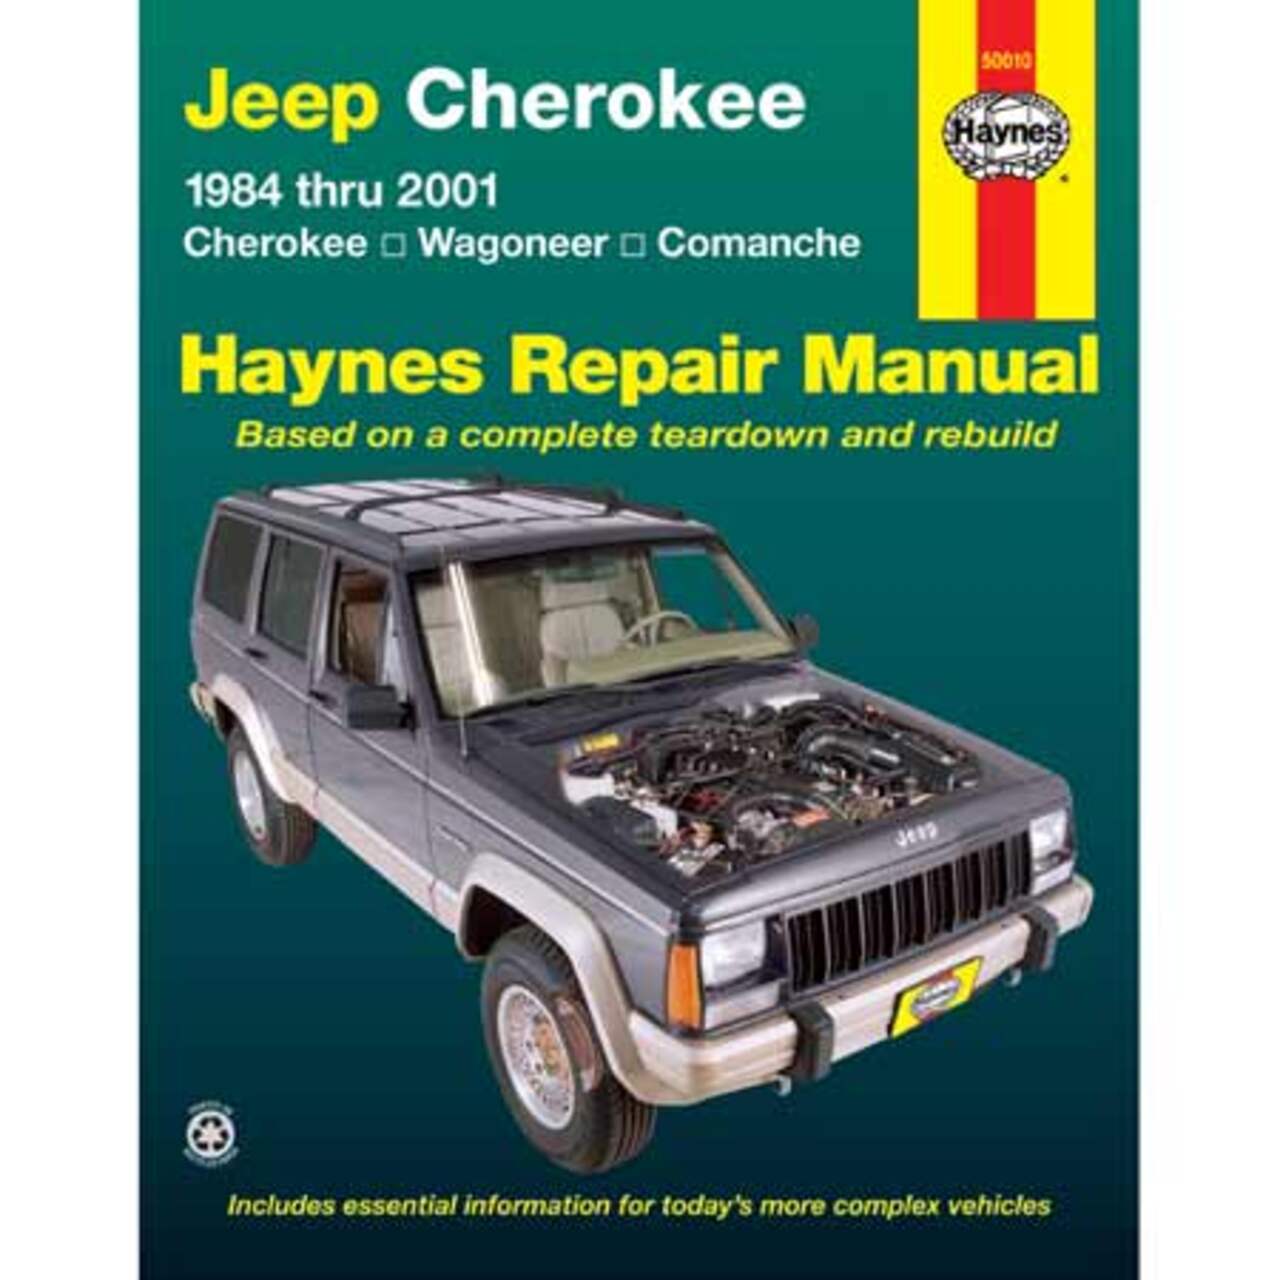 https://media-www.canadiantire.ca/product/automotive/auto-maintenance/auto-shop-equipment-supplies/0259139/50010-jeep-chero-wagon-coman-84-01-53cc0c7d-9673-4c67-94a9-0300318660ee.png?imdensity=1&imwidth=640&impolicy=mZoom